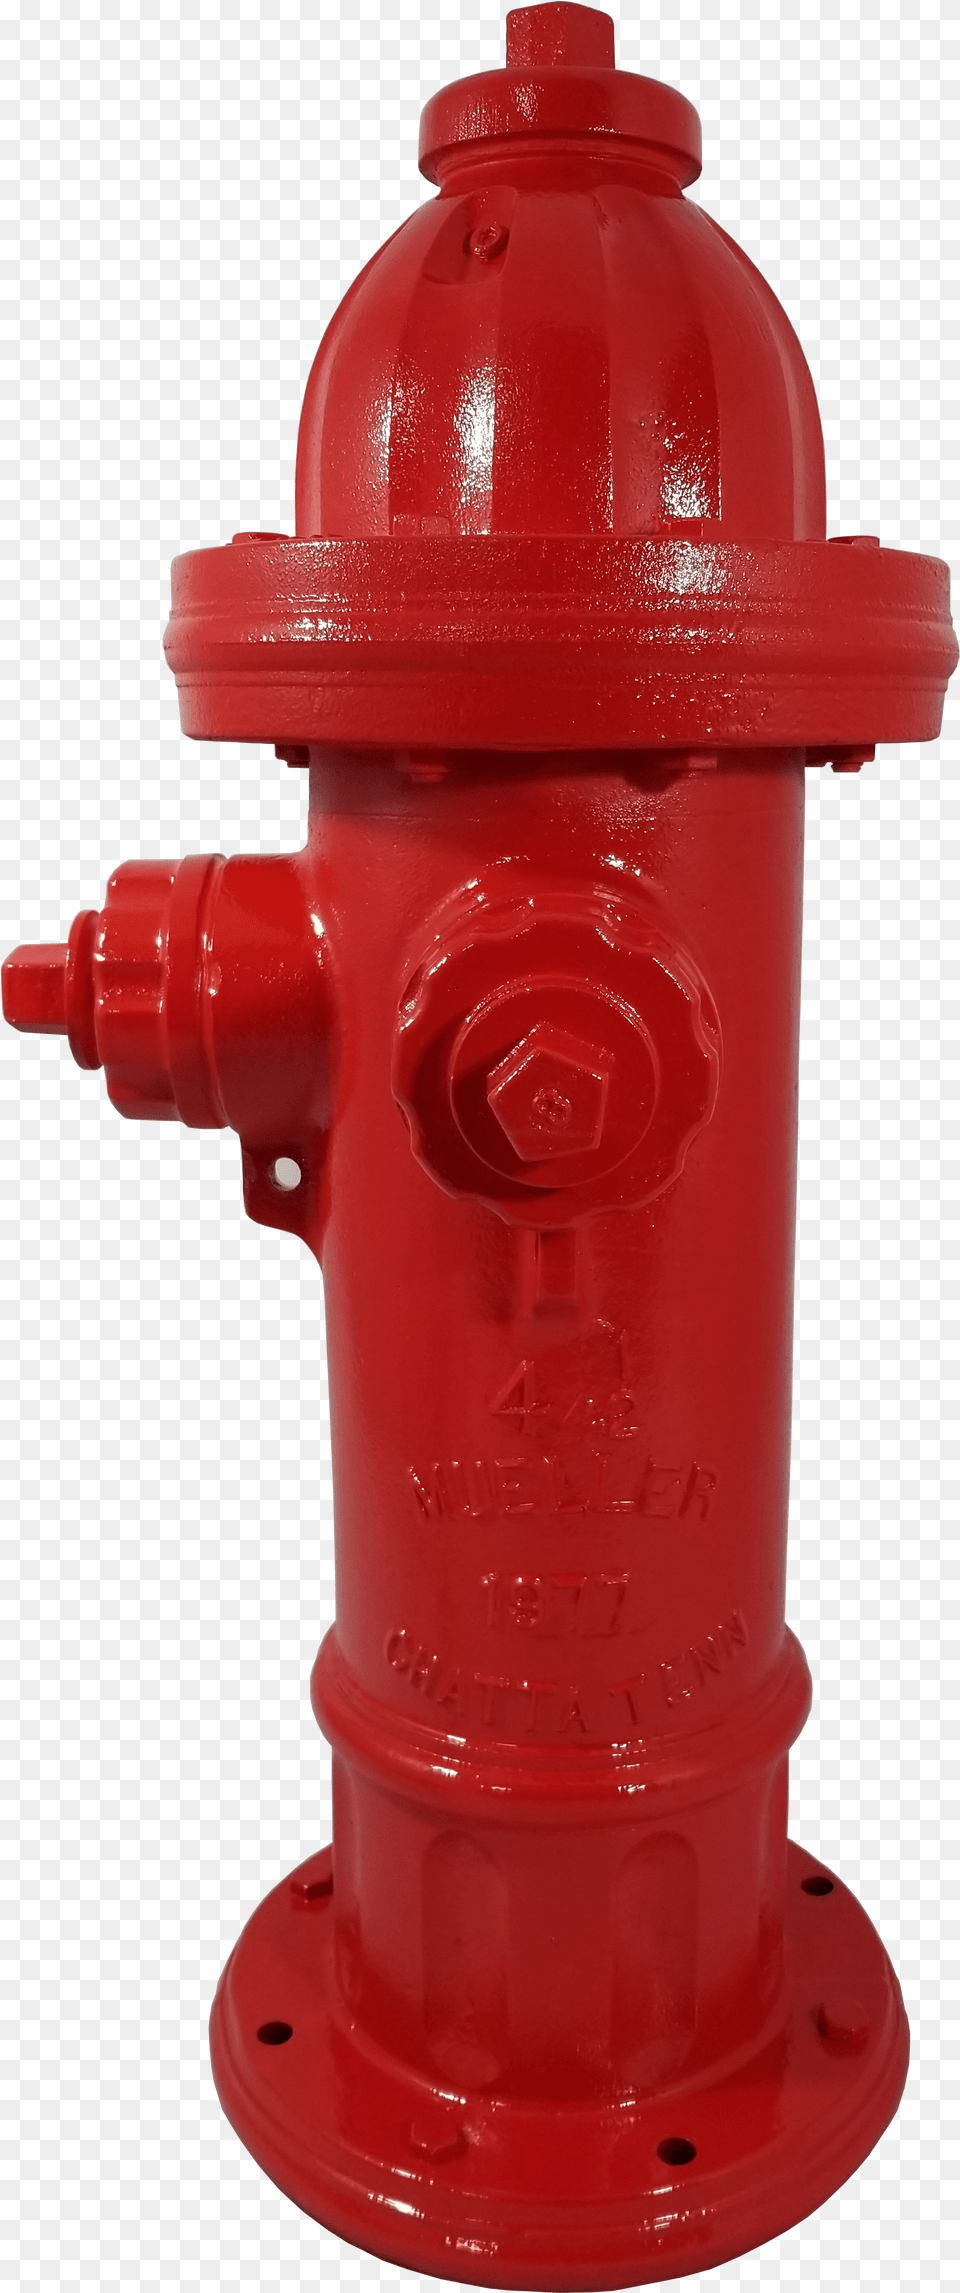 Yellow Fire Hydrant File Download Fire Hydrant, Fire Hydrant Free Transparent Png